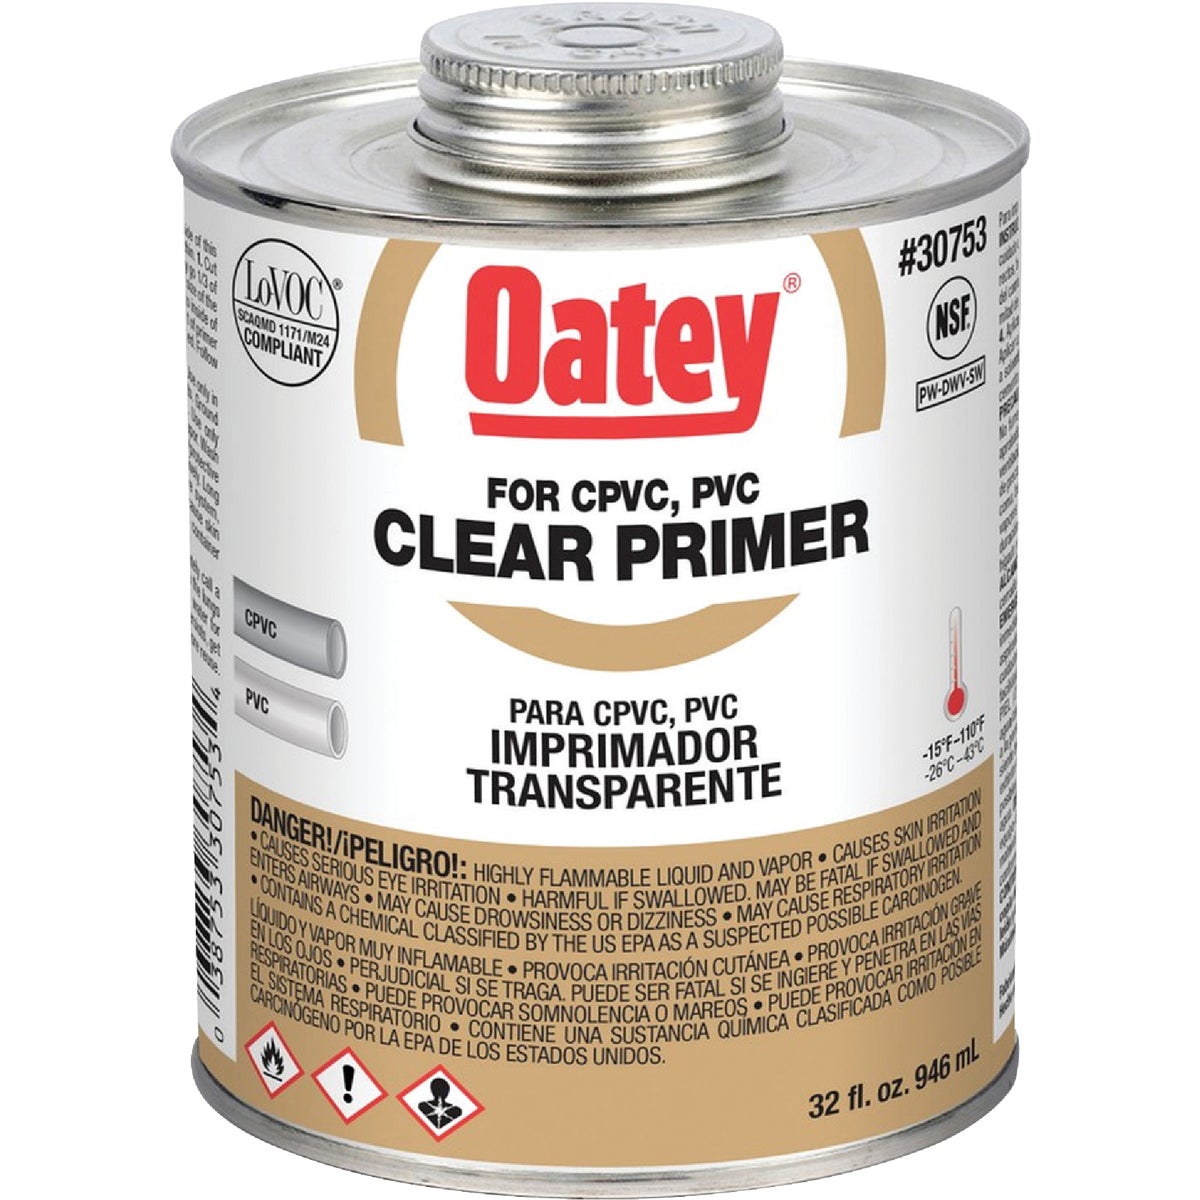 Oatey 32 Oz. Clear Pipe and Fitting Primer for PVC/CPVC 